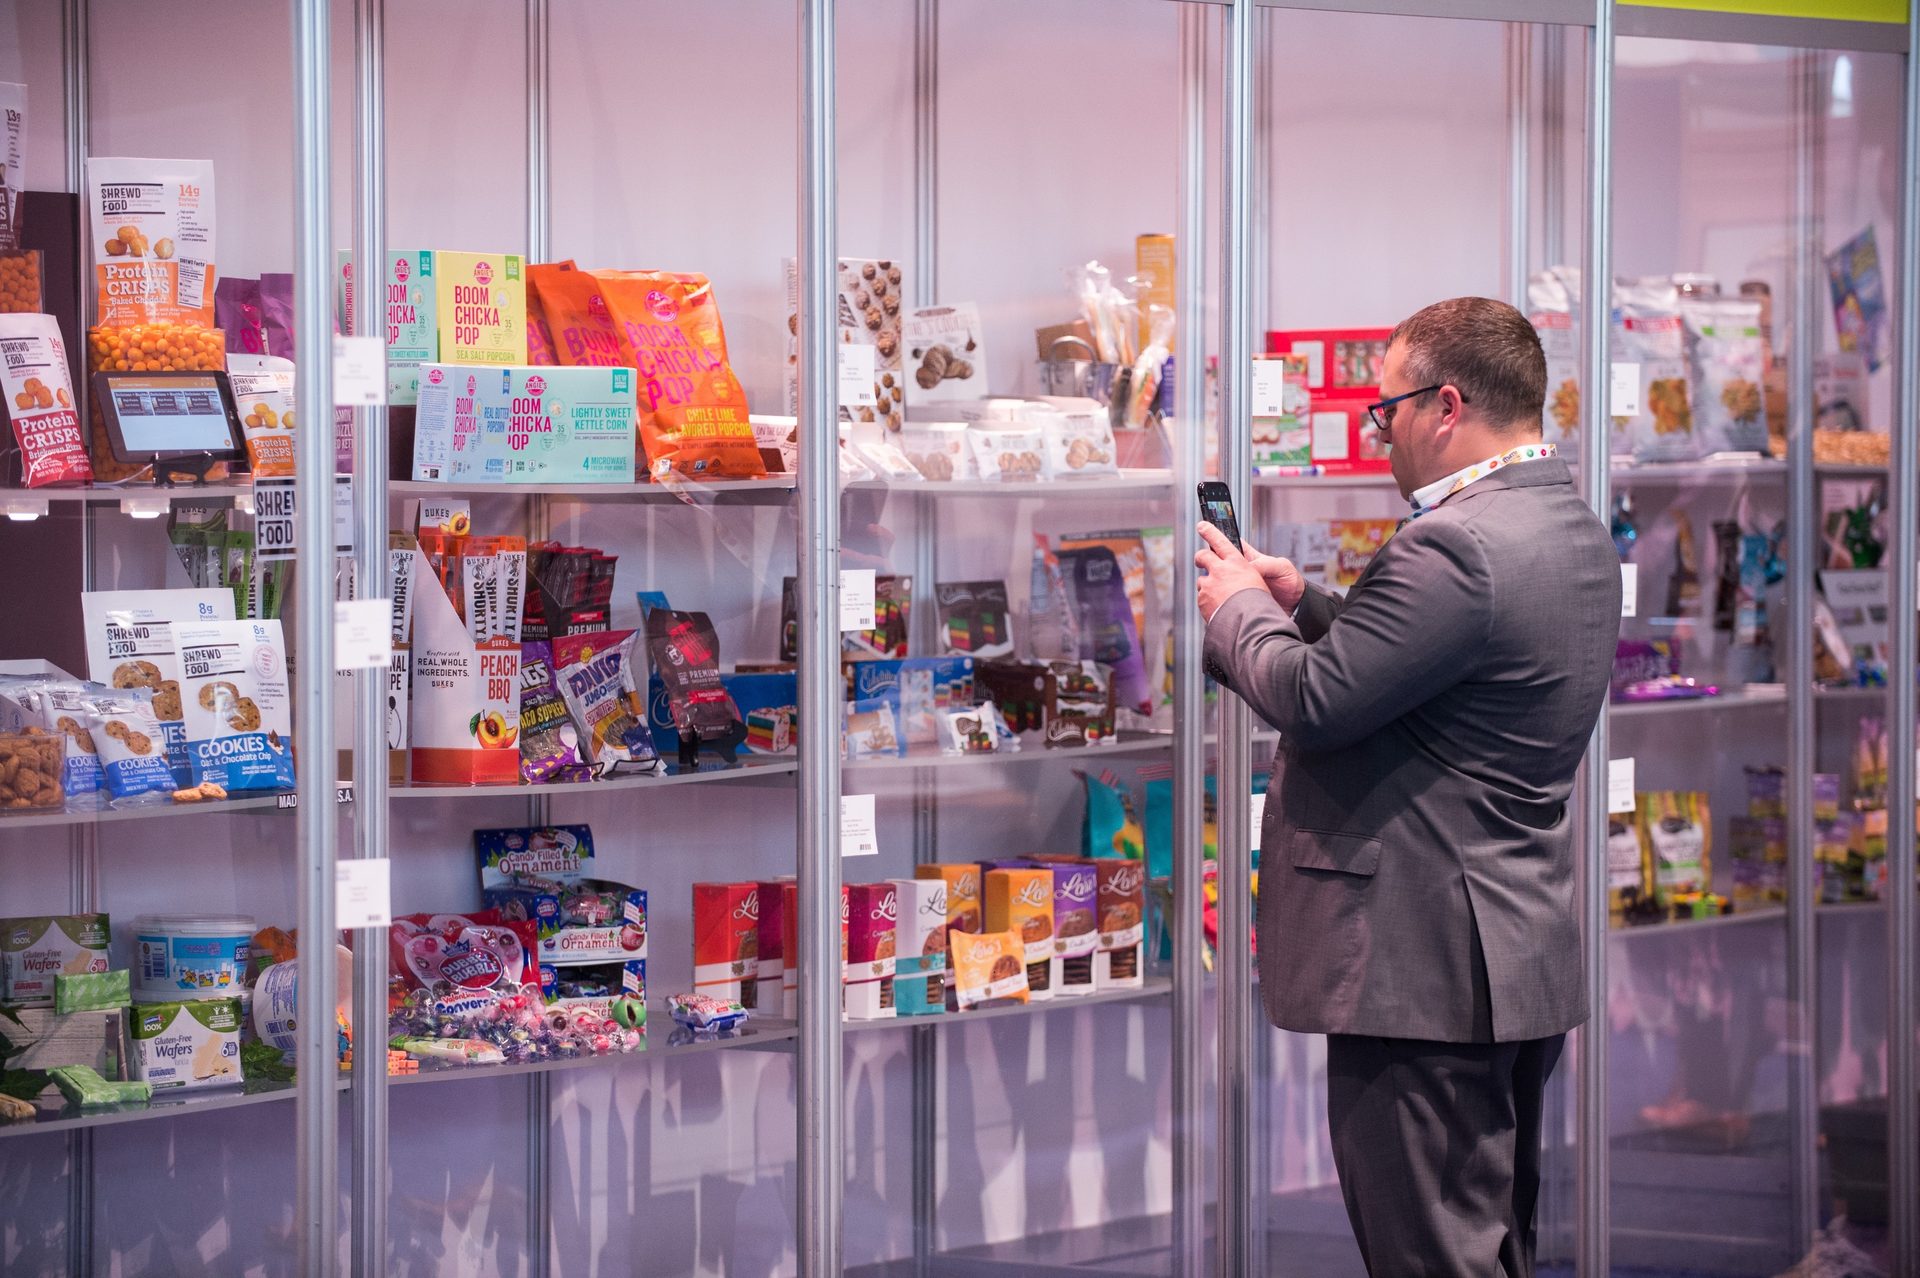 Interior photo, Display rack, Colorful packages, Man in suit